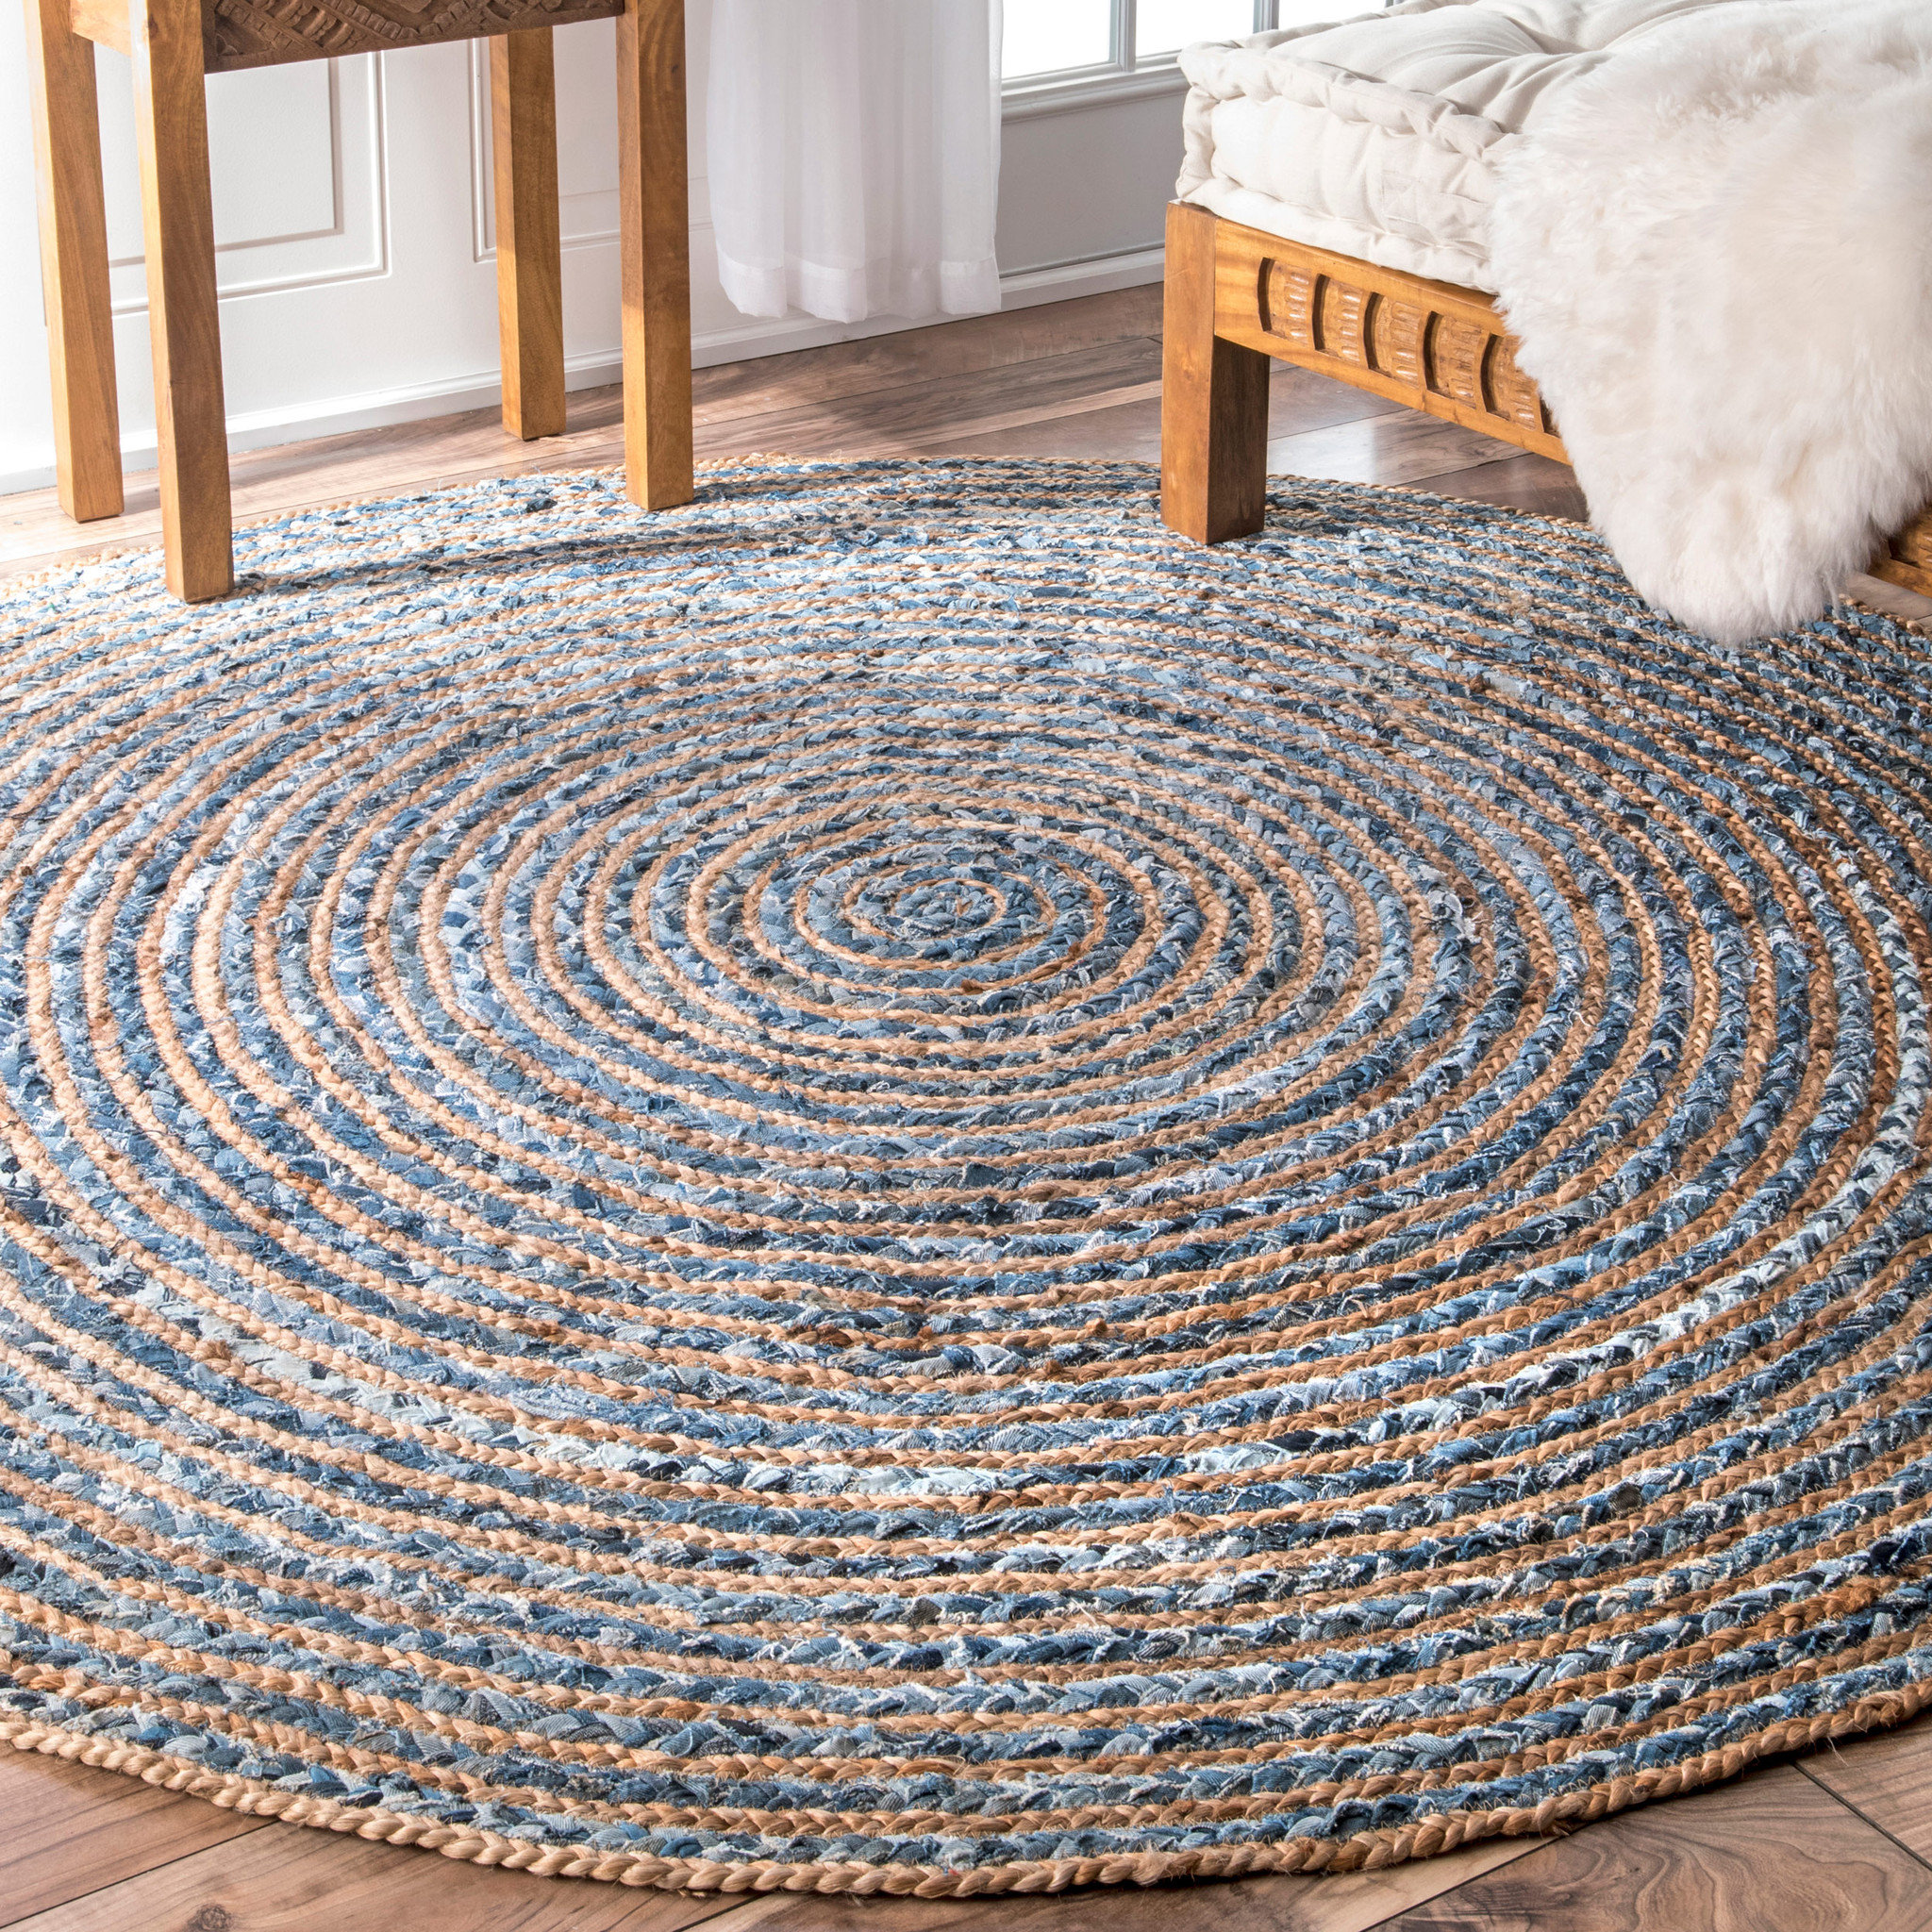 Cocoa Bean Black-Brown-Grey Oval Cotton Braided Rugs Reversible